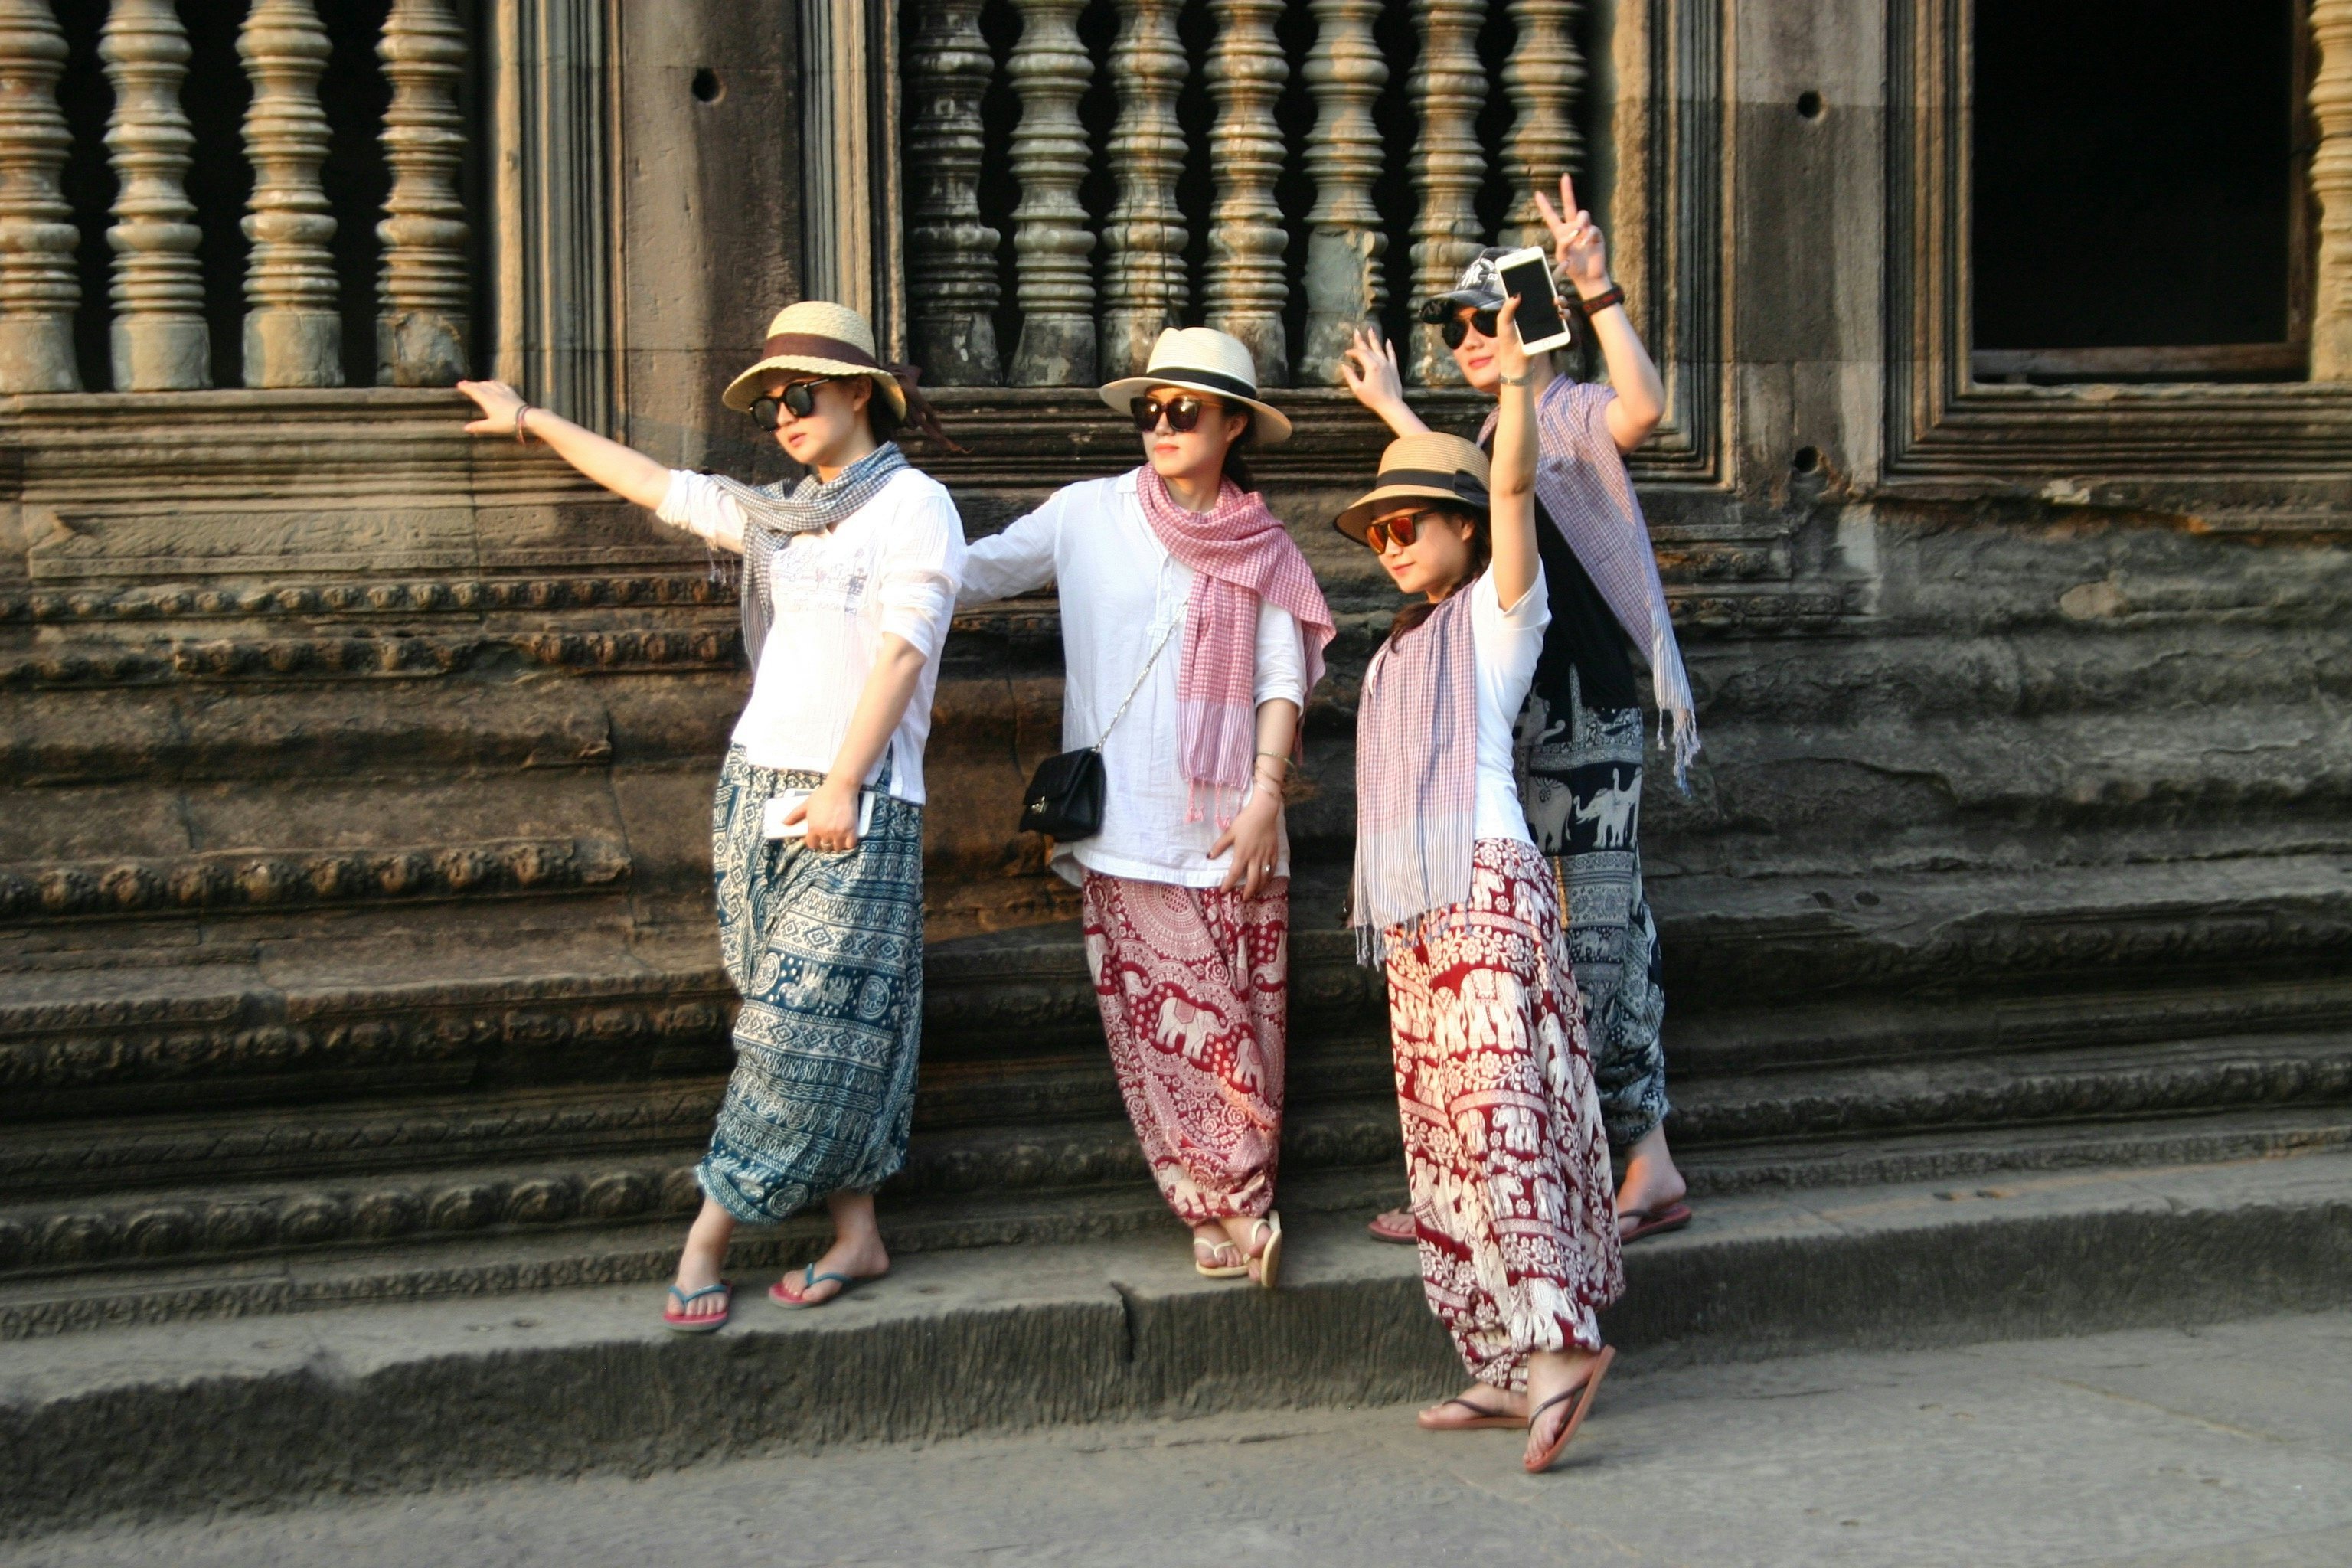 Chinese tourists pose for a picture at Angkor Wat in Cambodia. (Jing Daily)